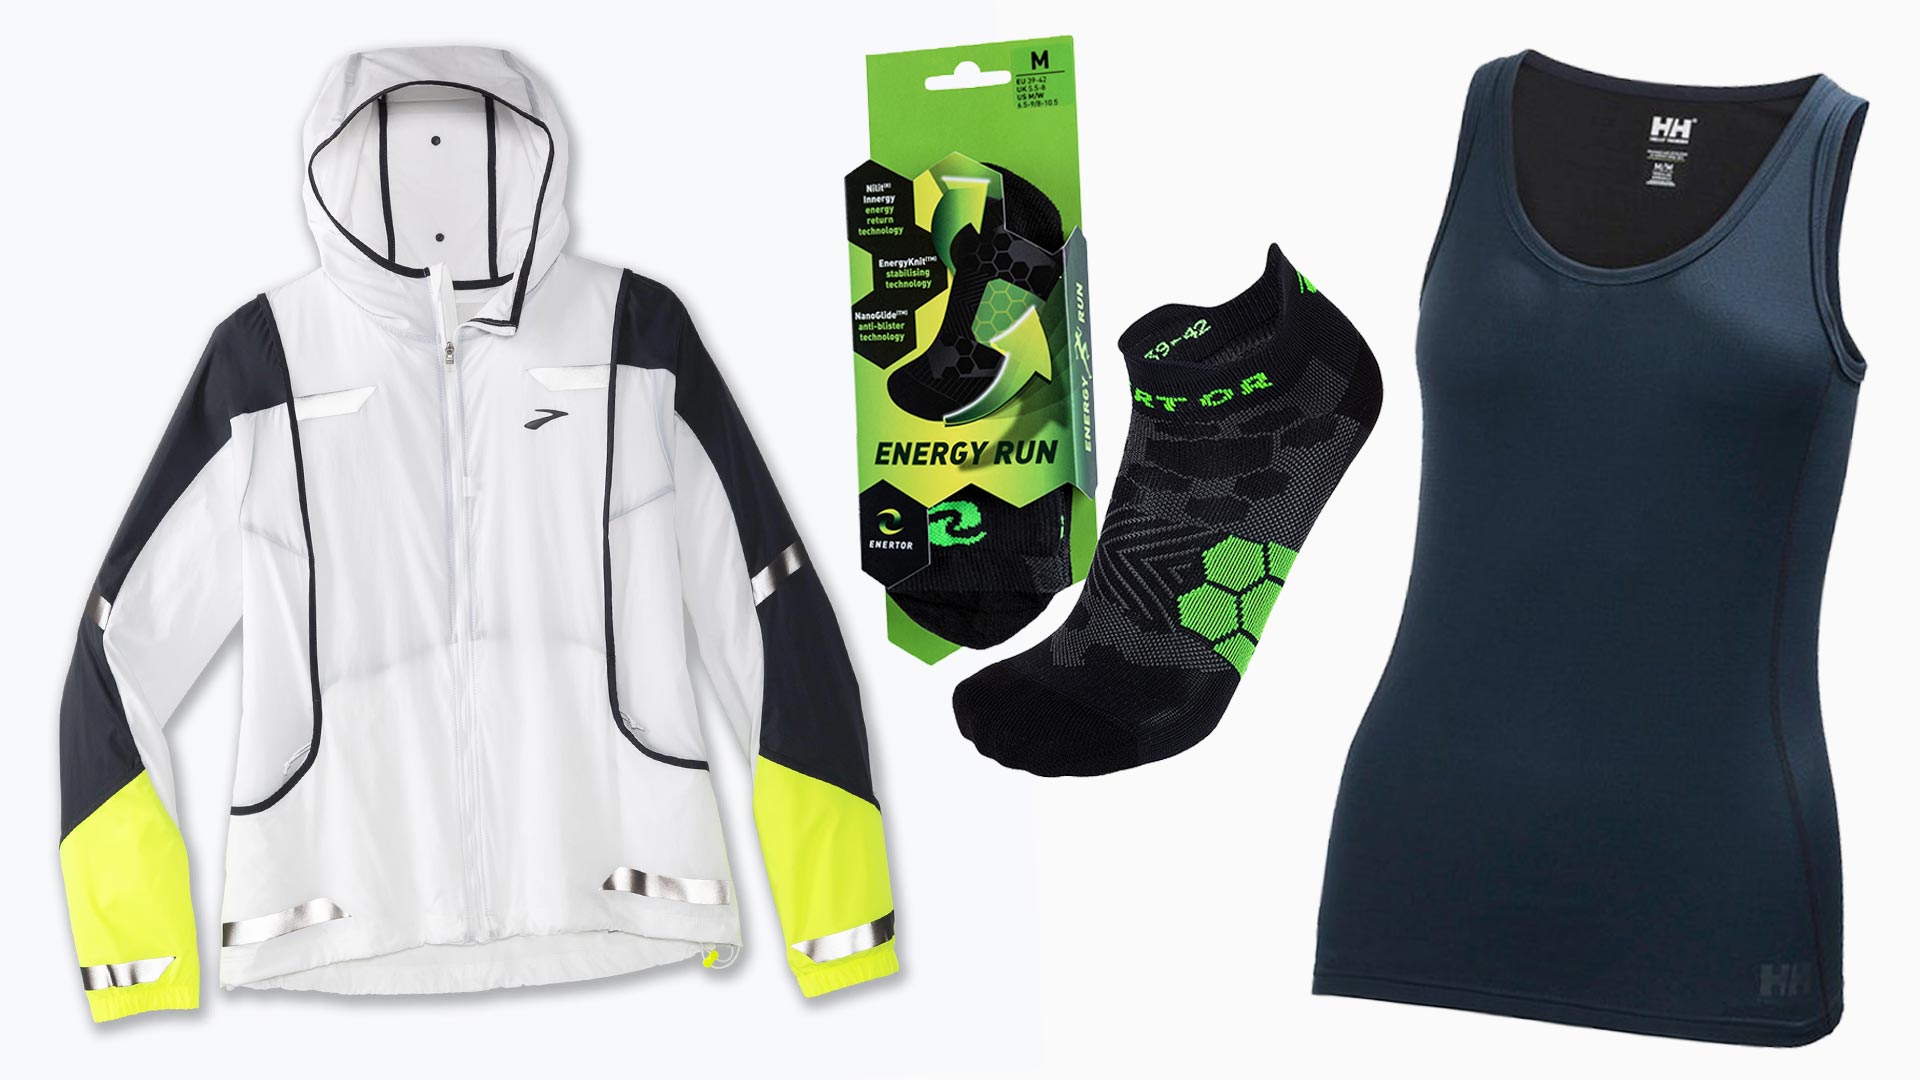 We review the best running gear from lightweight socks to waterproof jackets